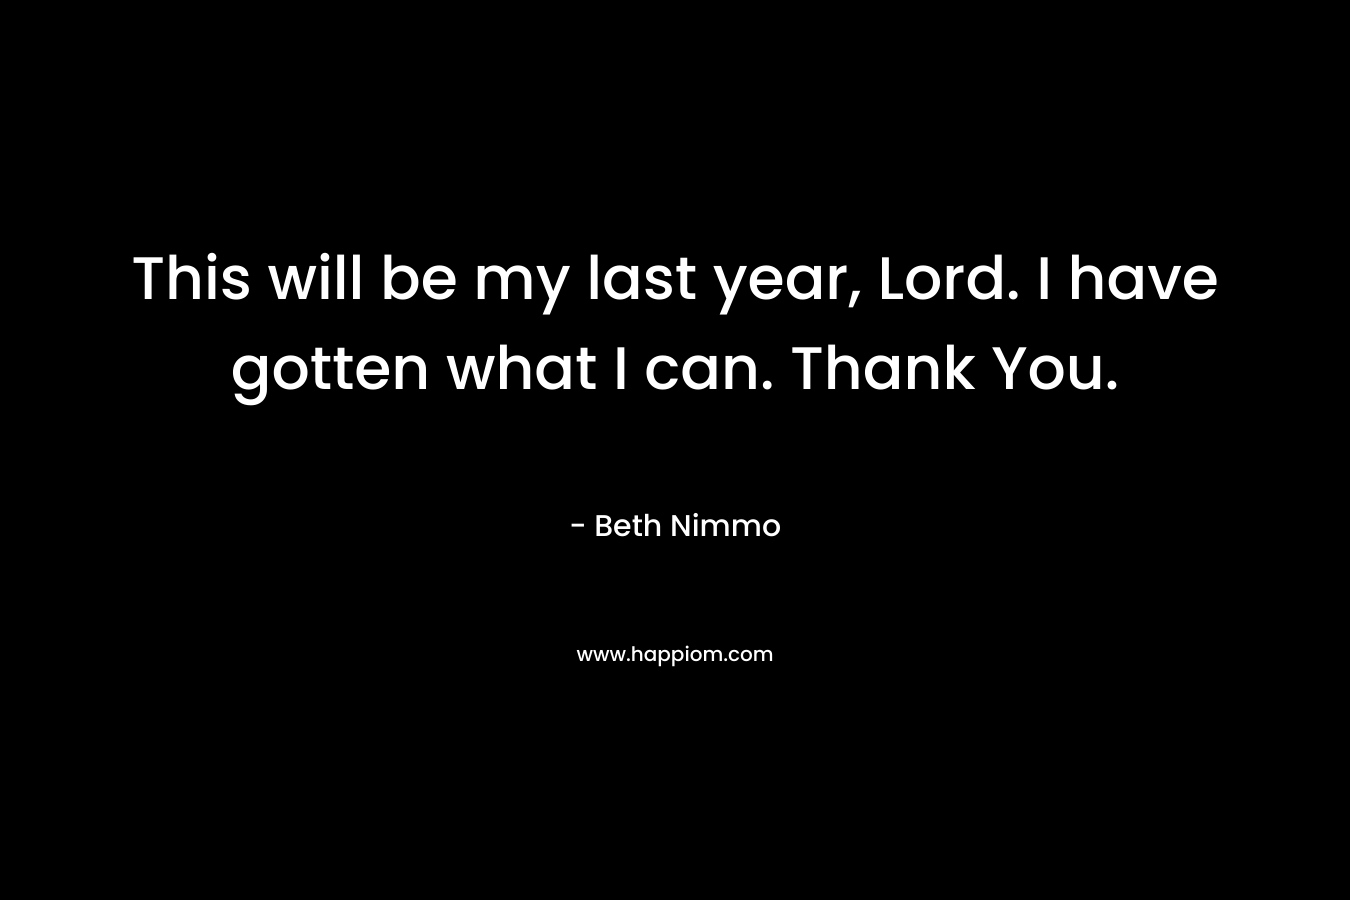 This will be my last year, Lord. I have gotten what I can. Thank You. – Beth Nimmo